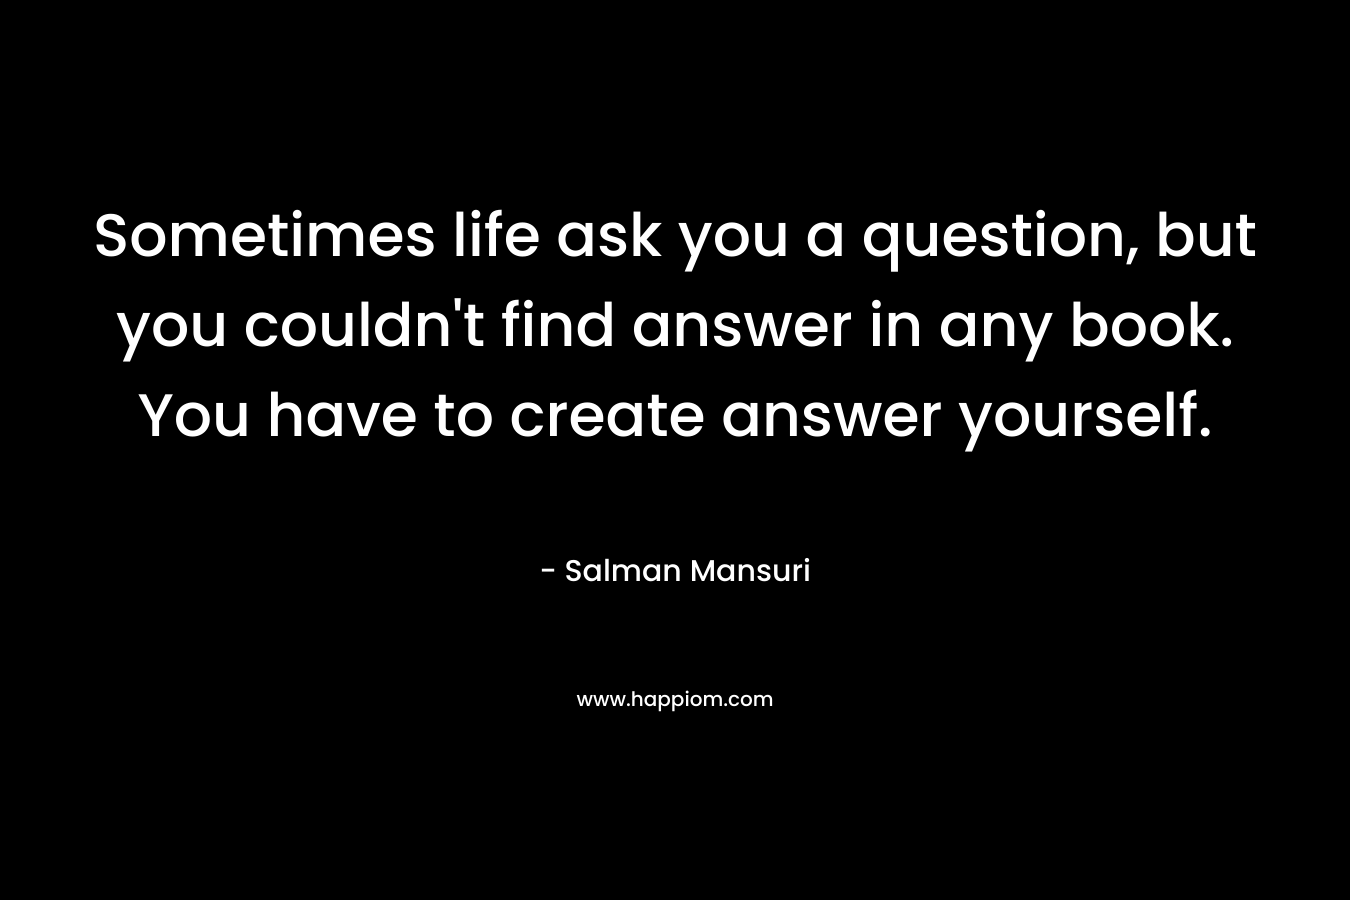 Sometimes life ask you a question, but you couldn't find answer in any book. You have to create answer yourself.